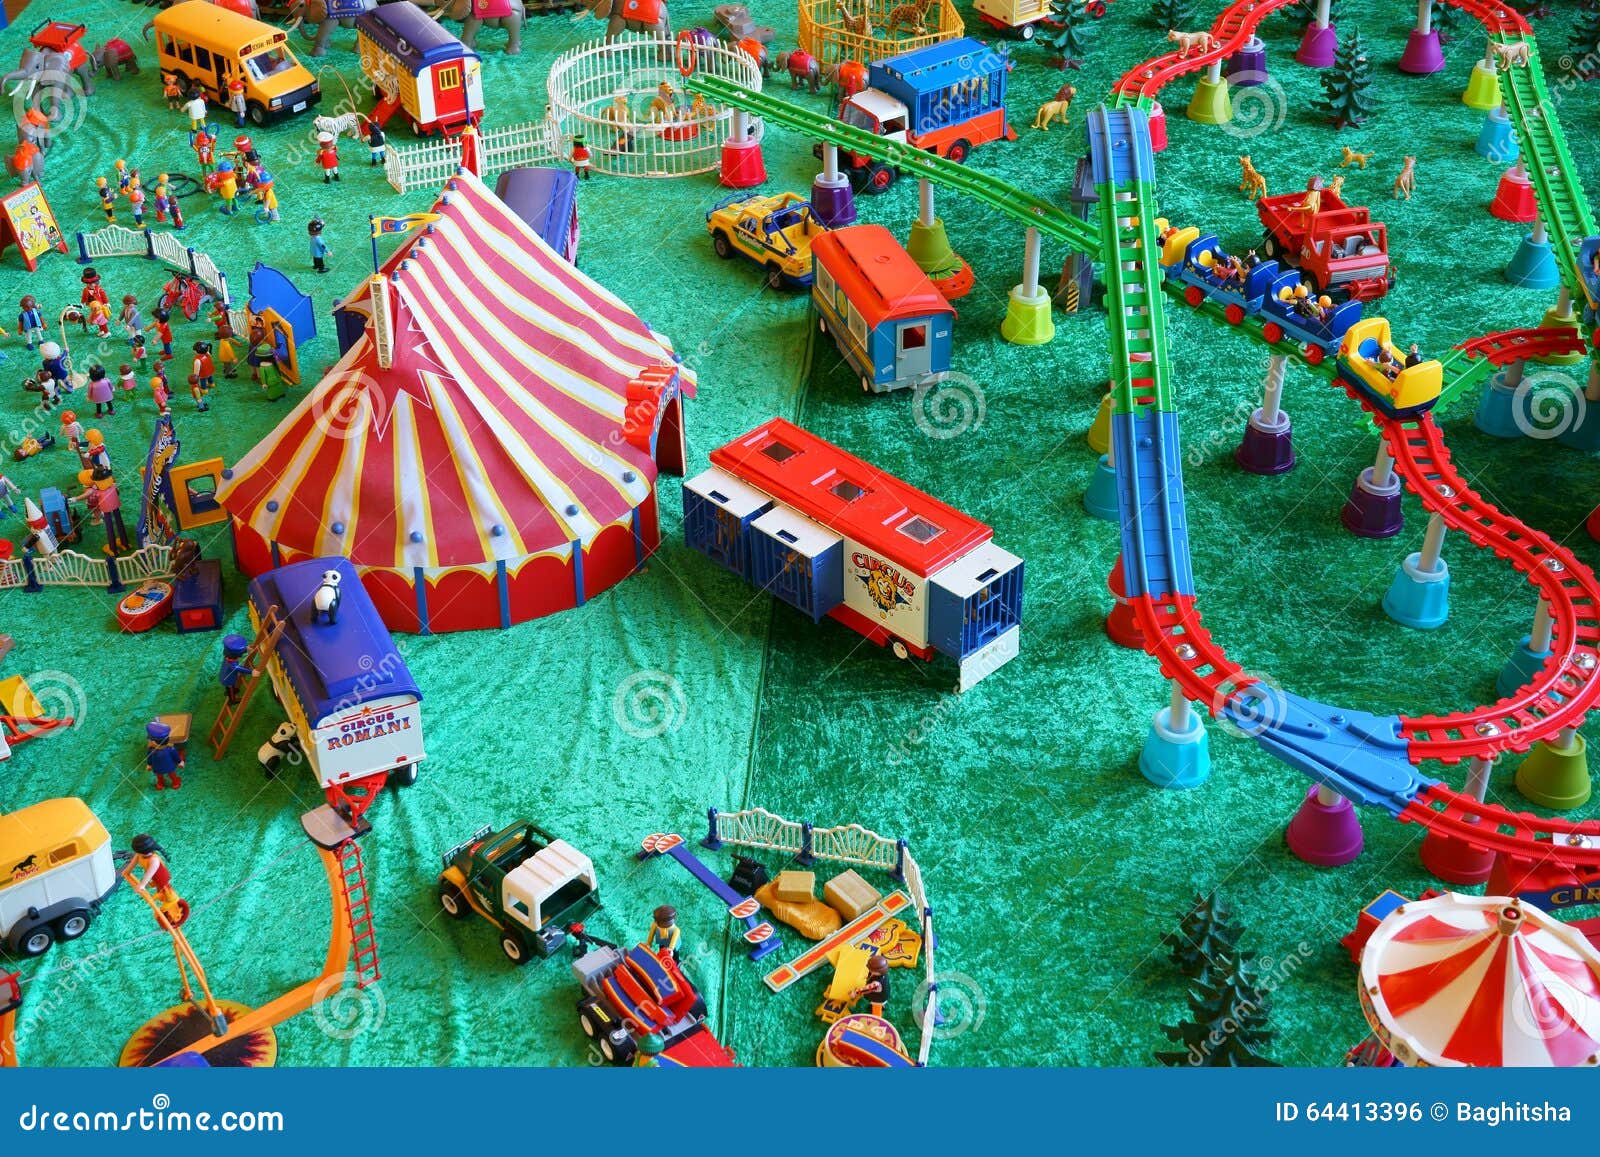 Playmobil Circus & Fair Collection Editorial Photo - Image of animals, objects: 64413396